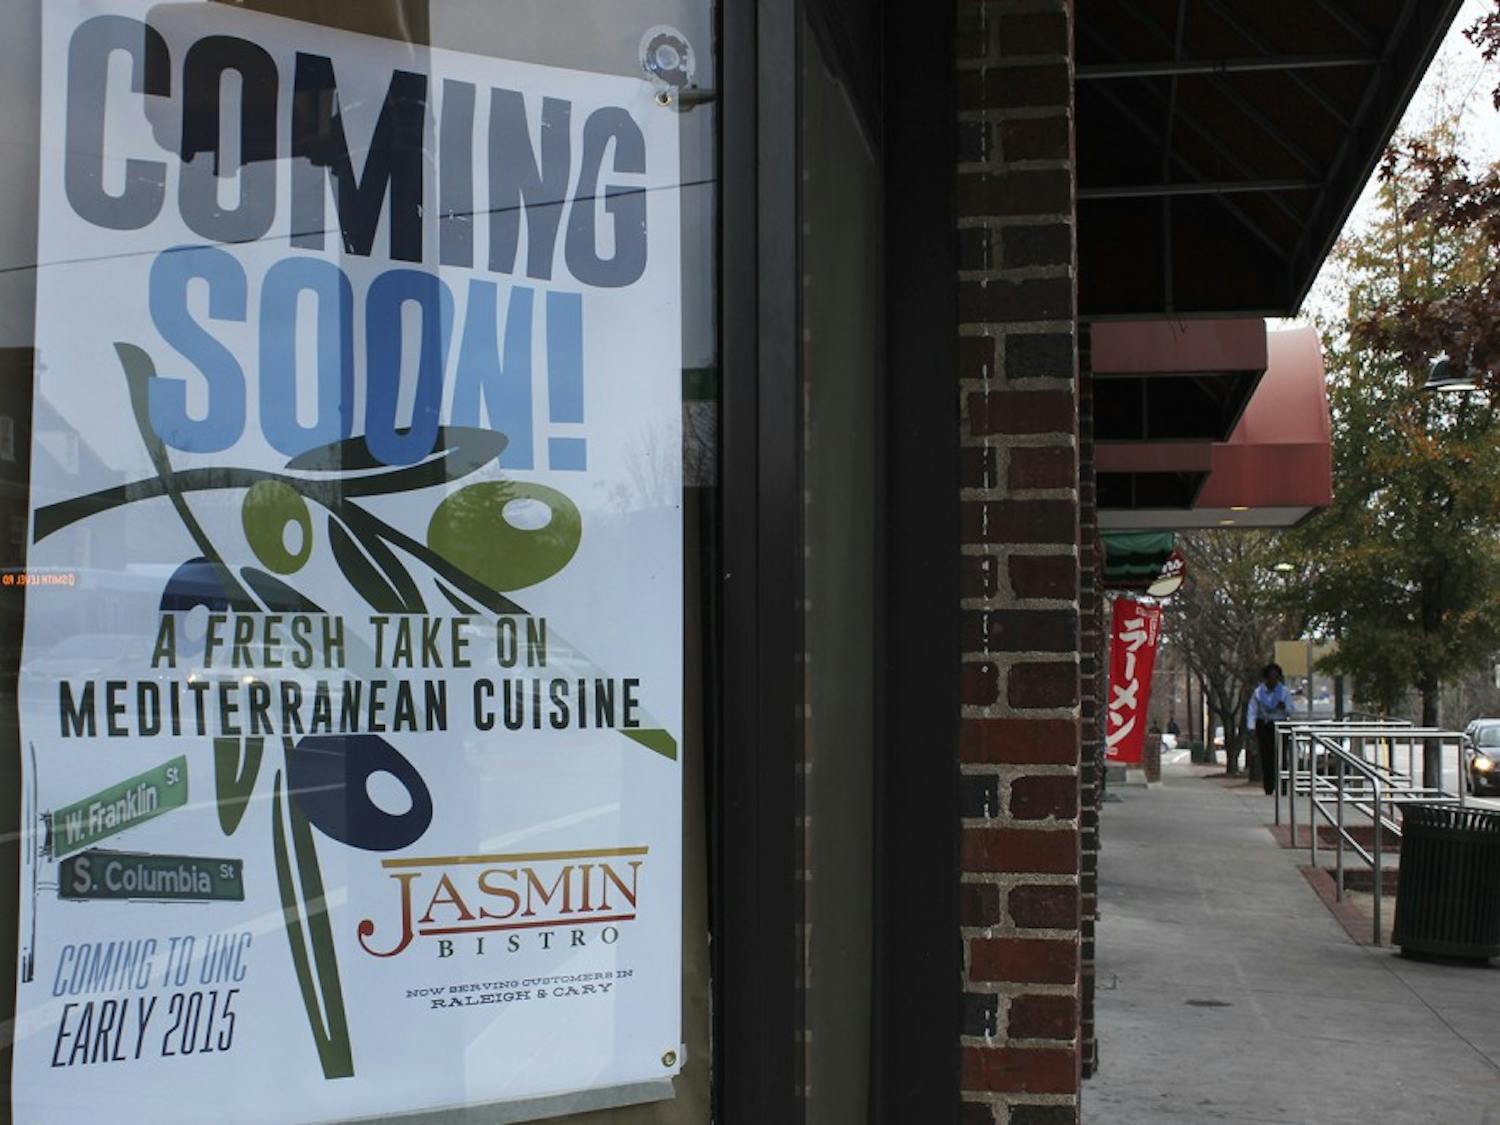 A New Mediterranean restaurant, Jasmin Bistro, is set to move into Qdoba Grill's old space on Franklin St. in early 2015.